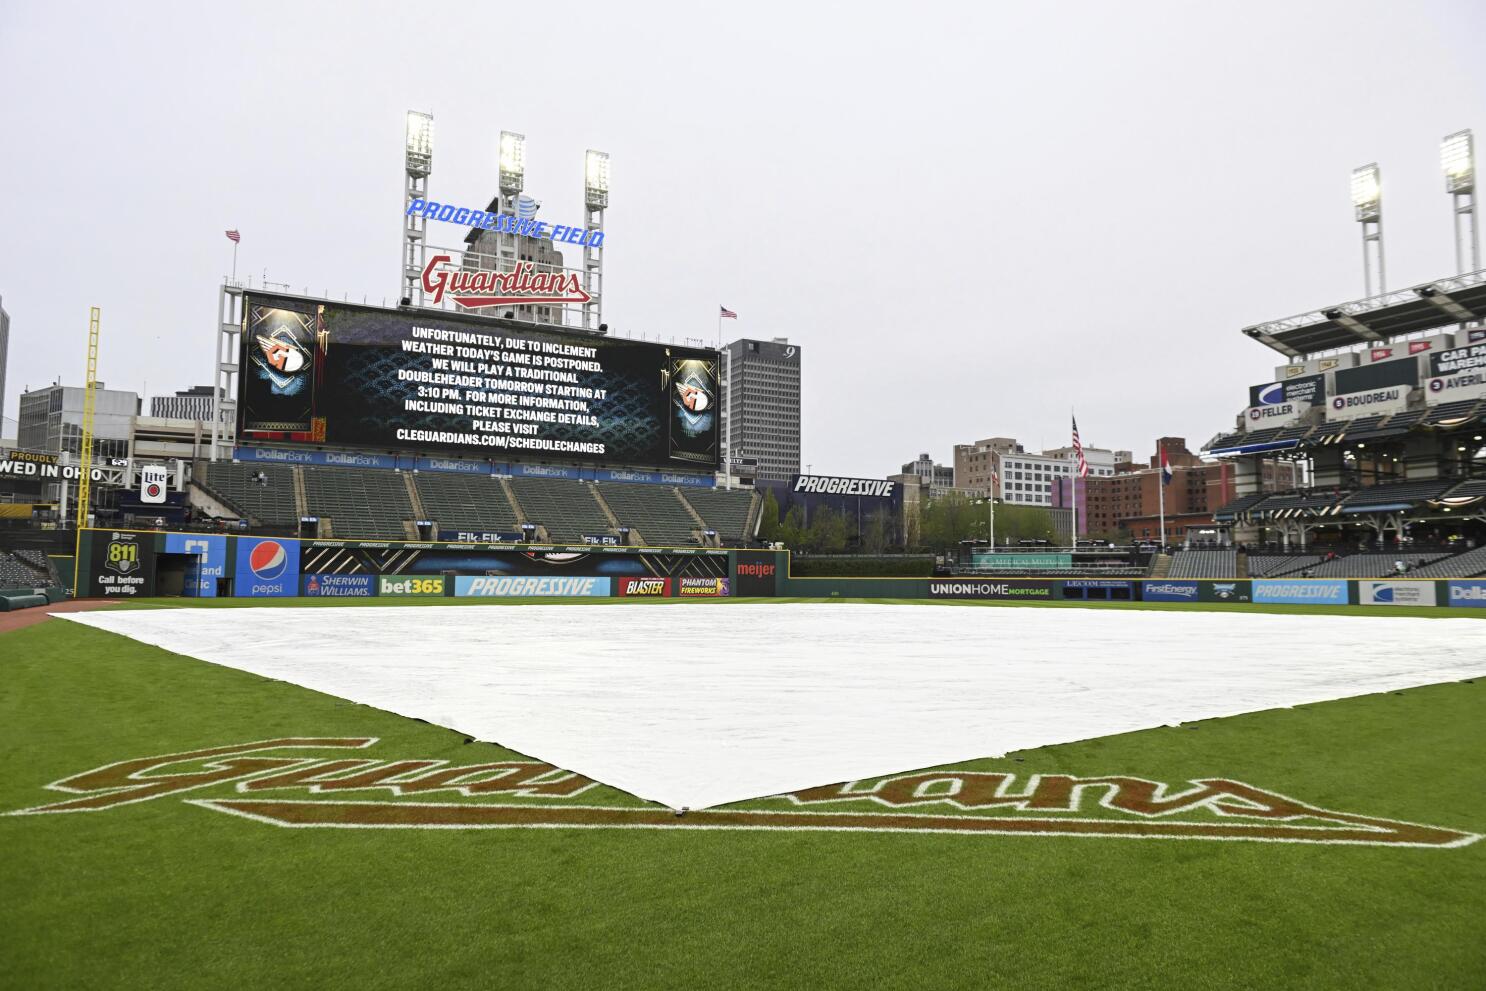 Cleveland Indians' game postponed due to weather